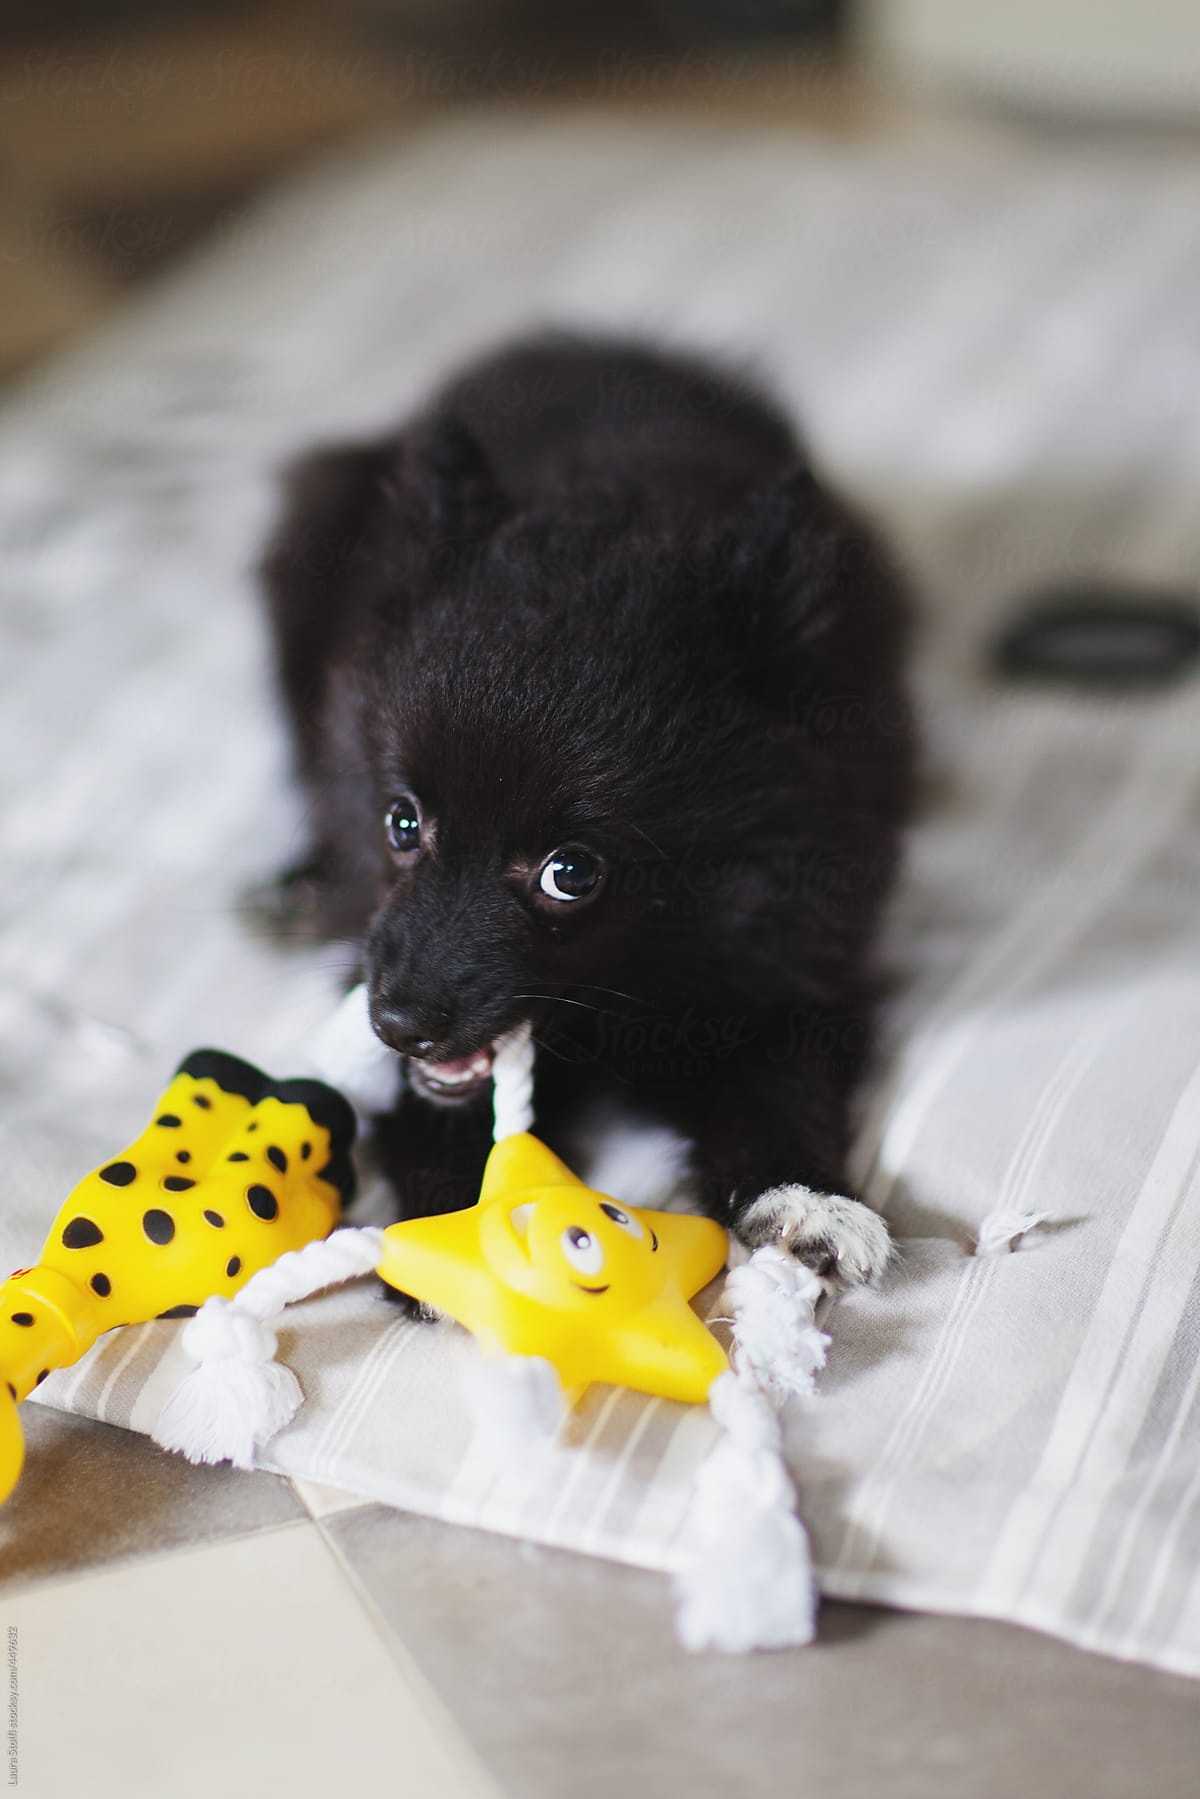 Black pomeranian puppy chewing her rubber toy and looking at the camera